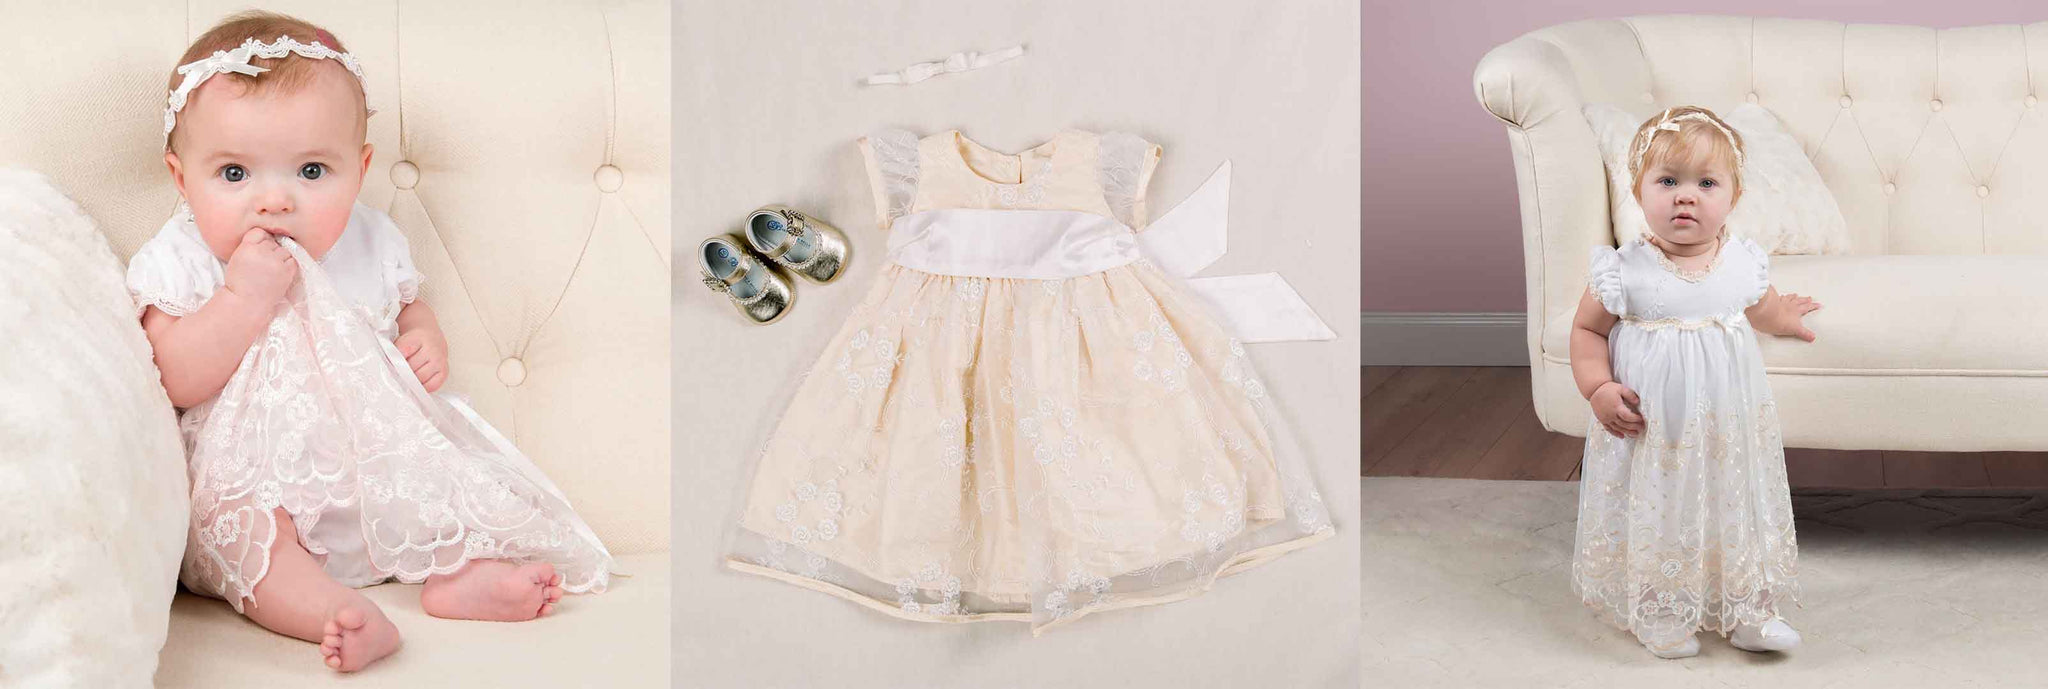 boutique baby girl dresses